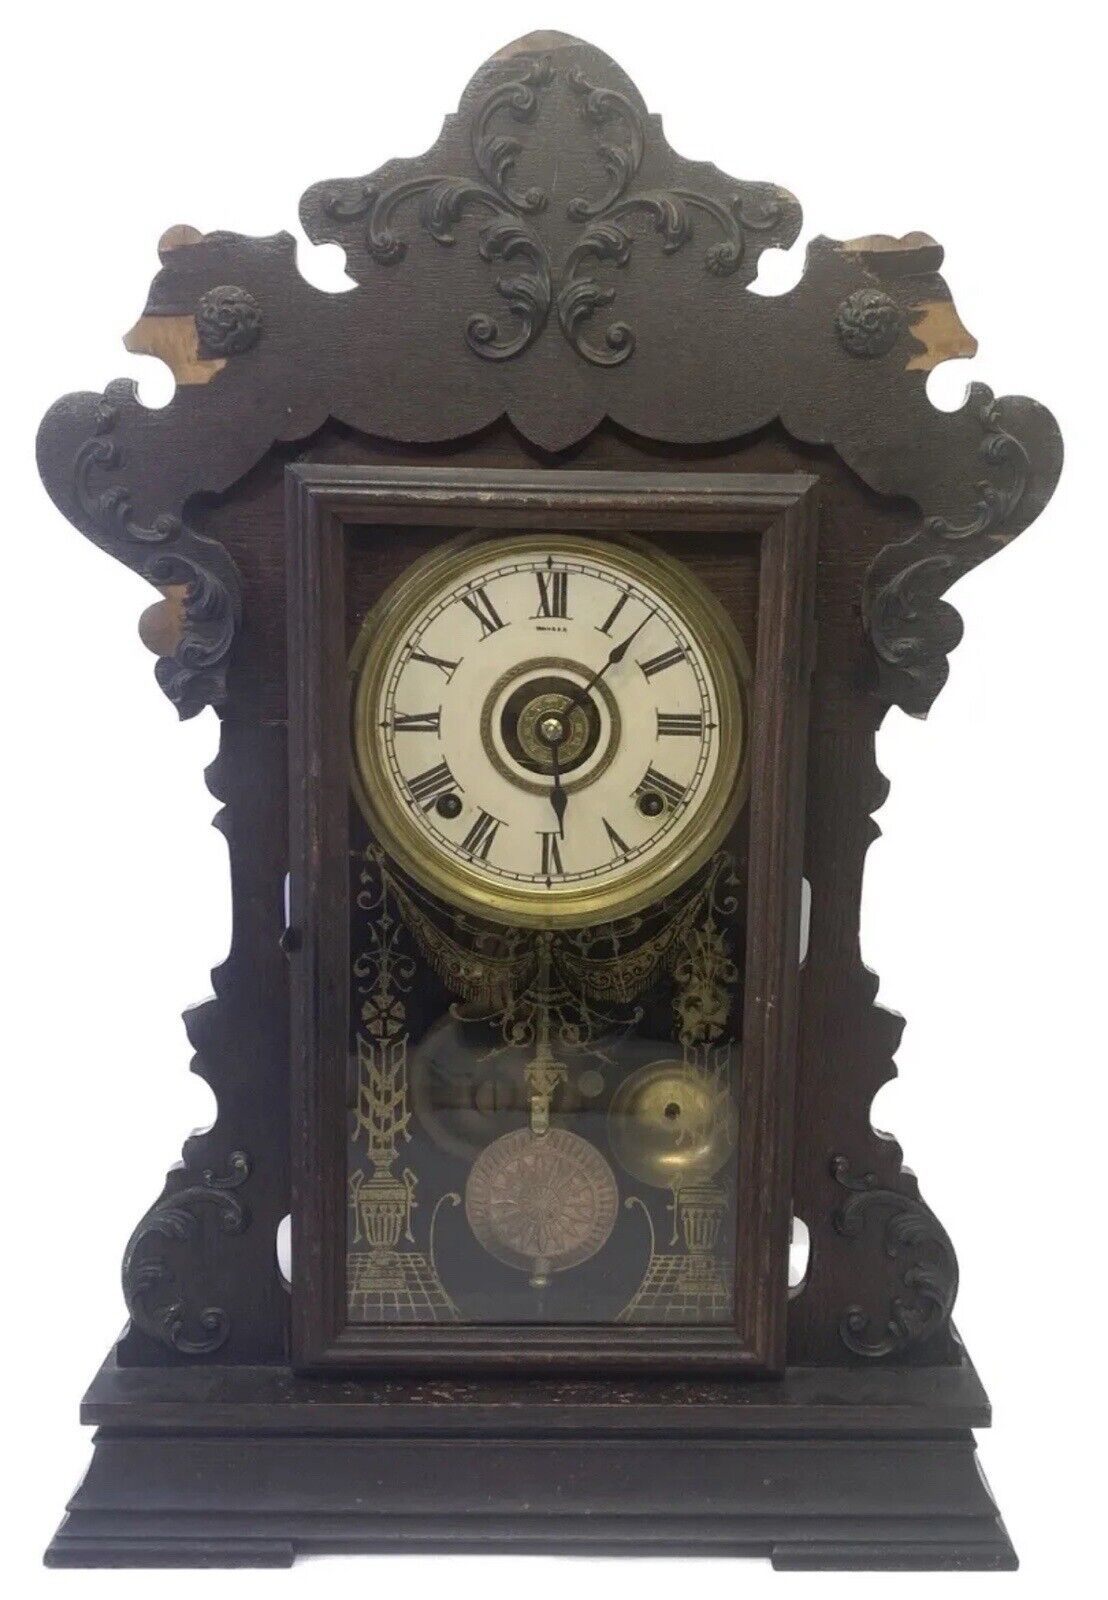 Vintage 1890s Seth Thomas Gingerbread Gong Clock With Half Hour Gong And Alarm